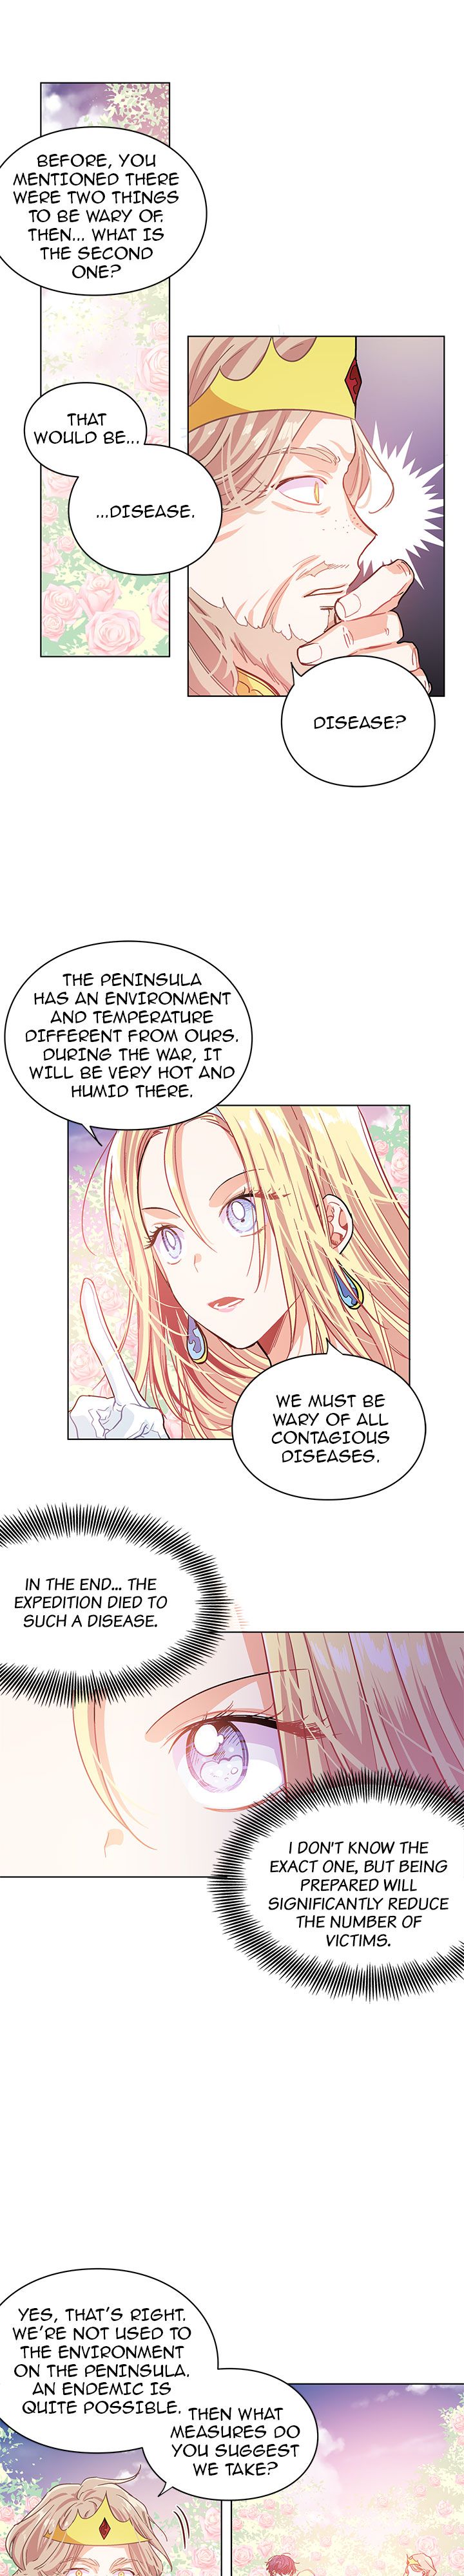 Doctor Elise - The Royal Lady with the Lamp - Chapter 8 Page 7